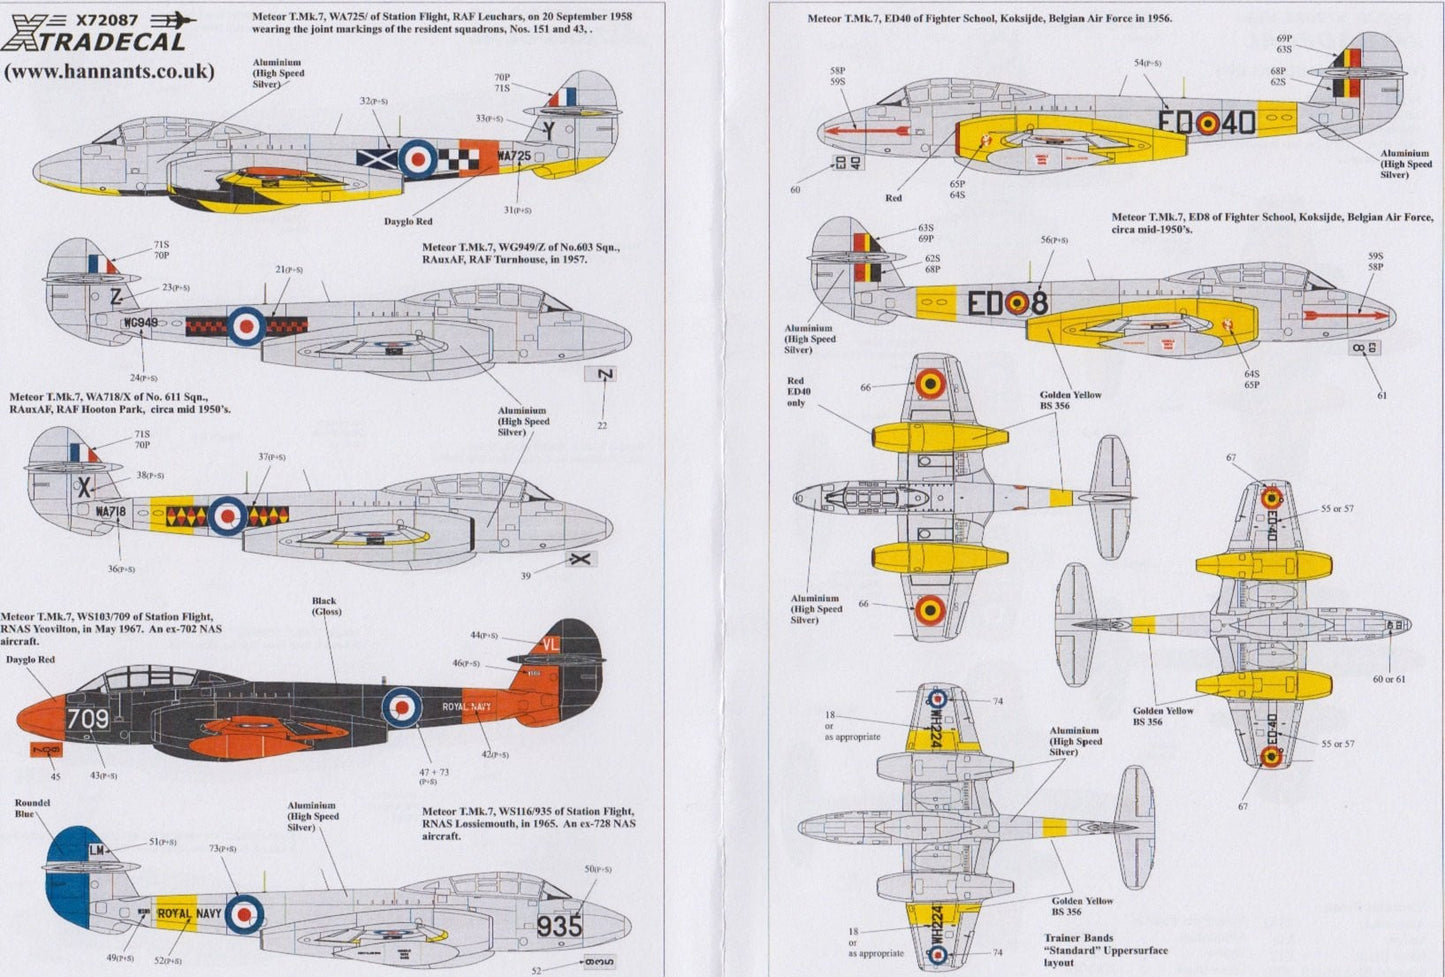 Xtradecal X72087 1/72 Gloster Meteor T.7 Model Decals - SGS Model Store